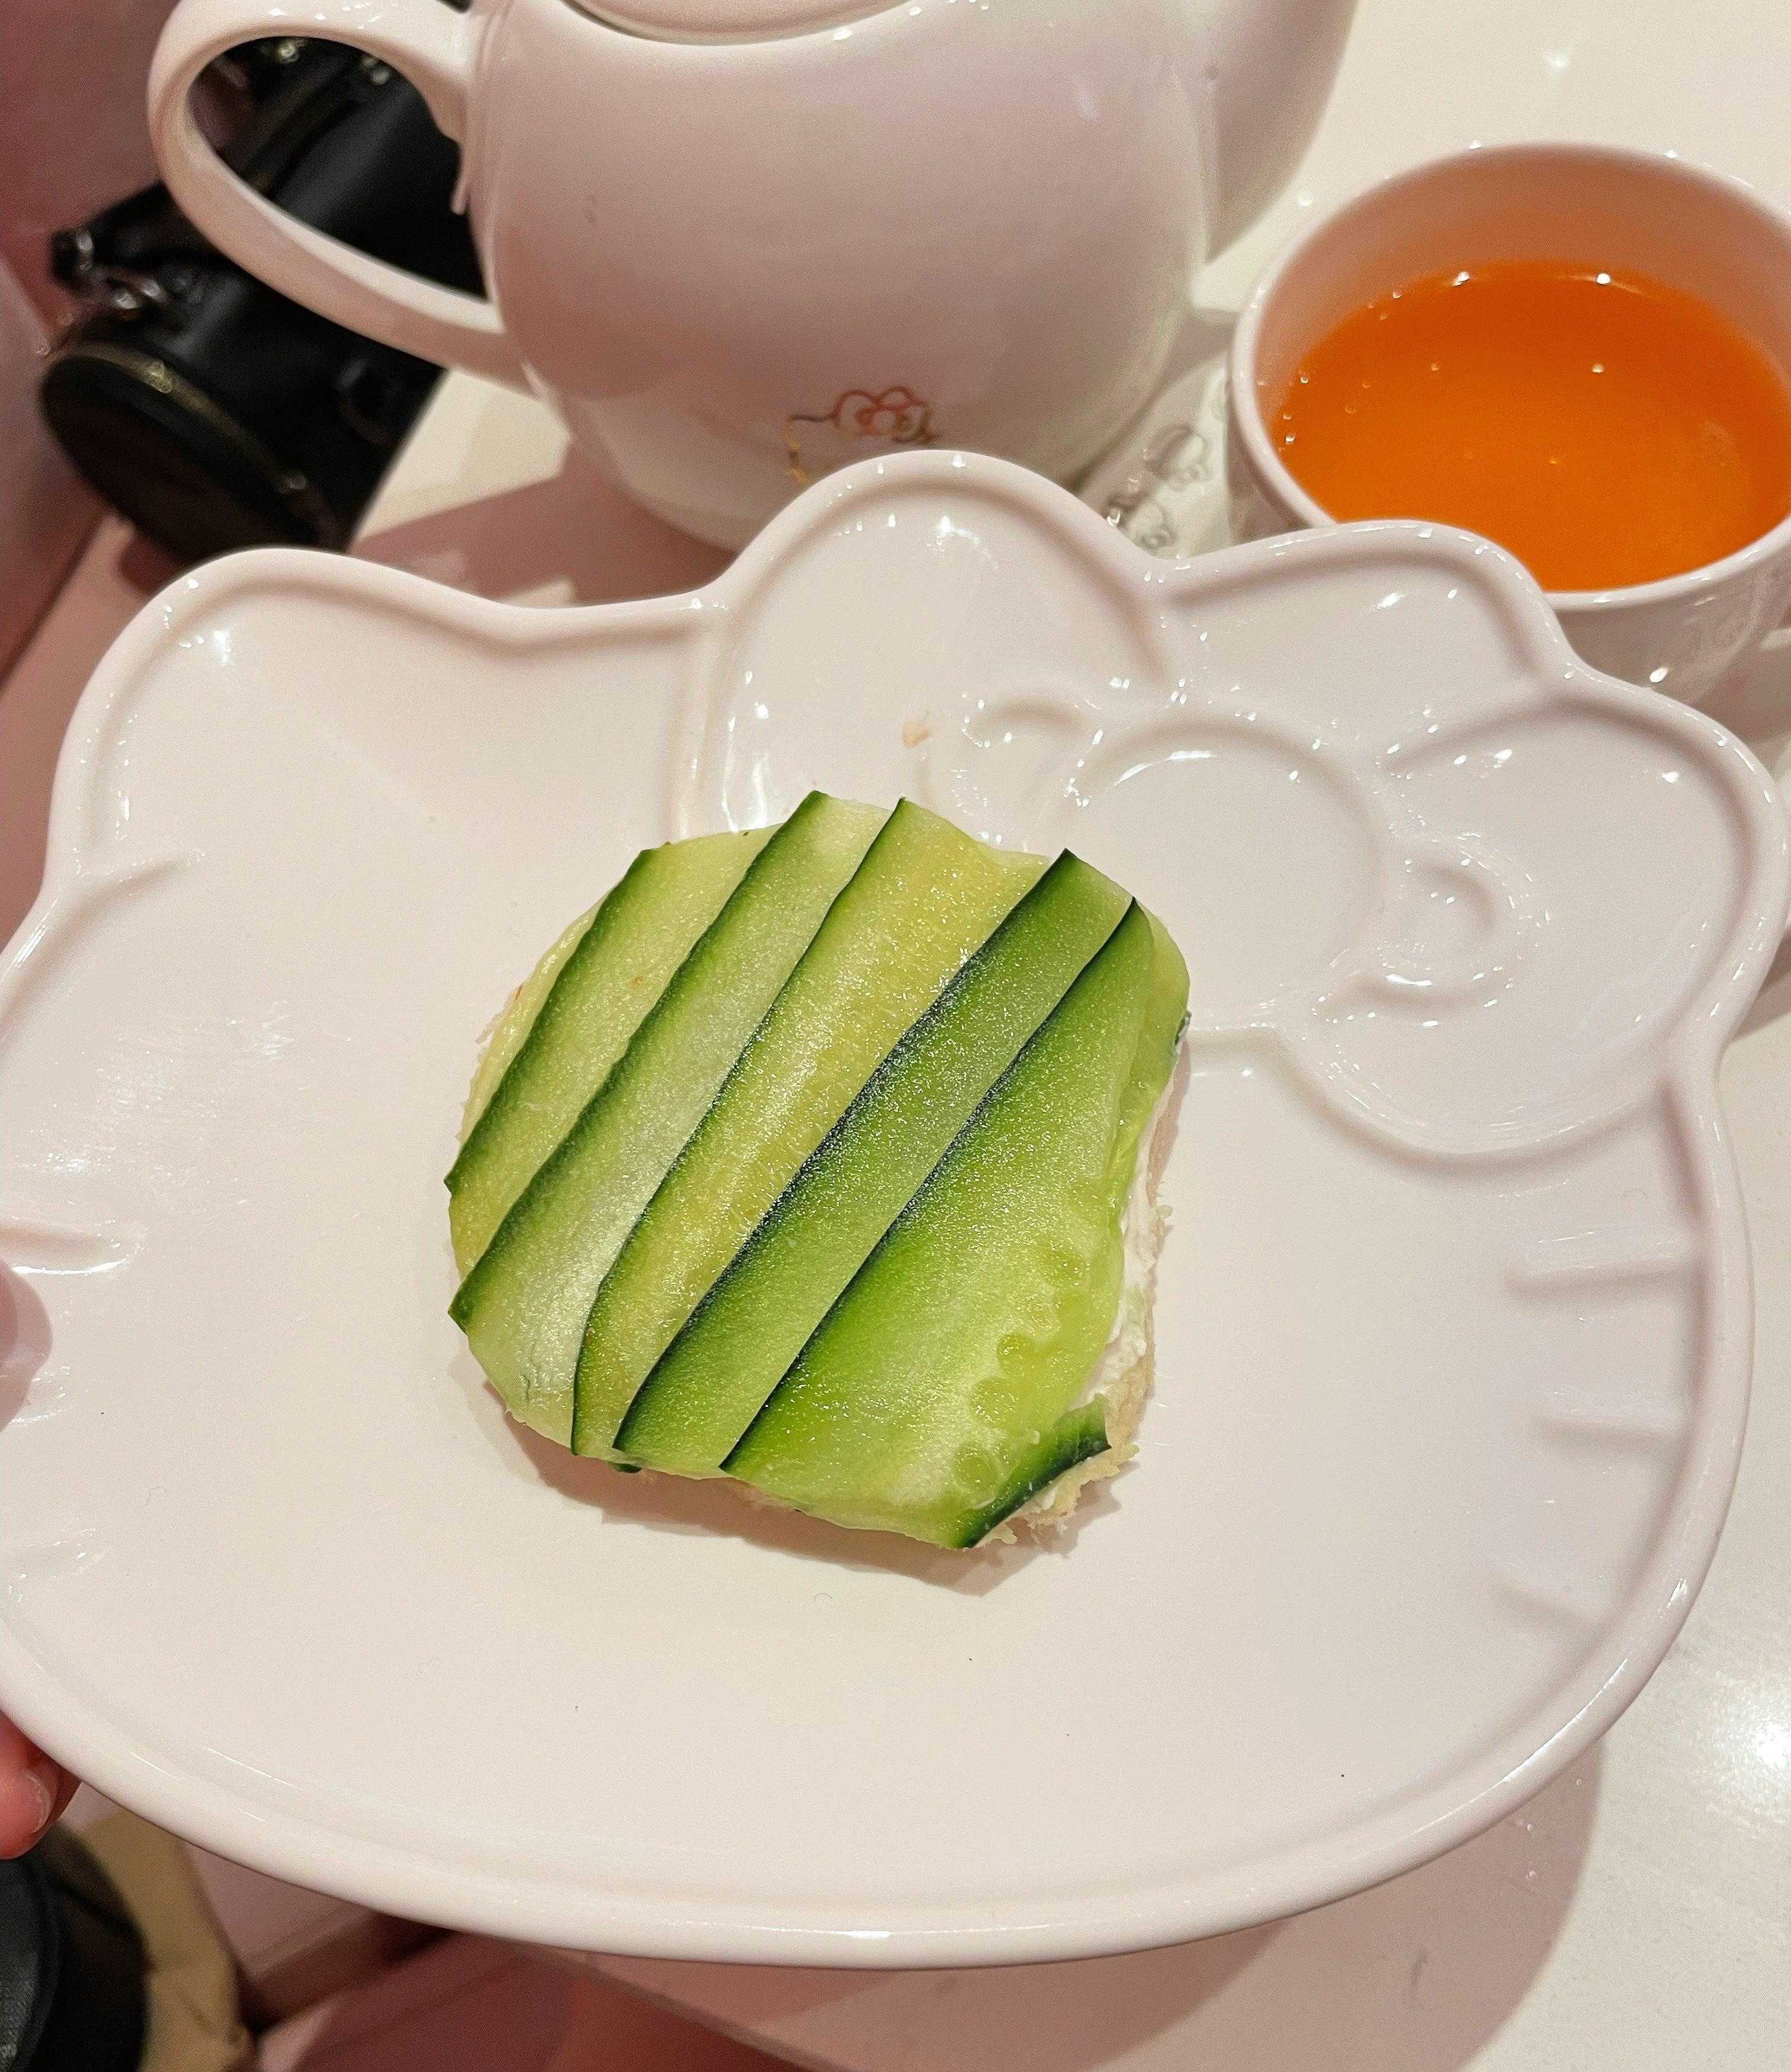 A cucumber sandwich is on a plate